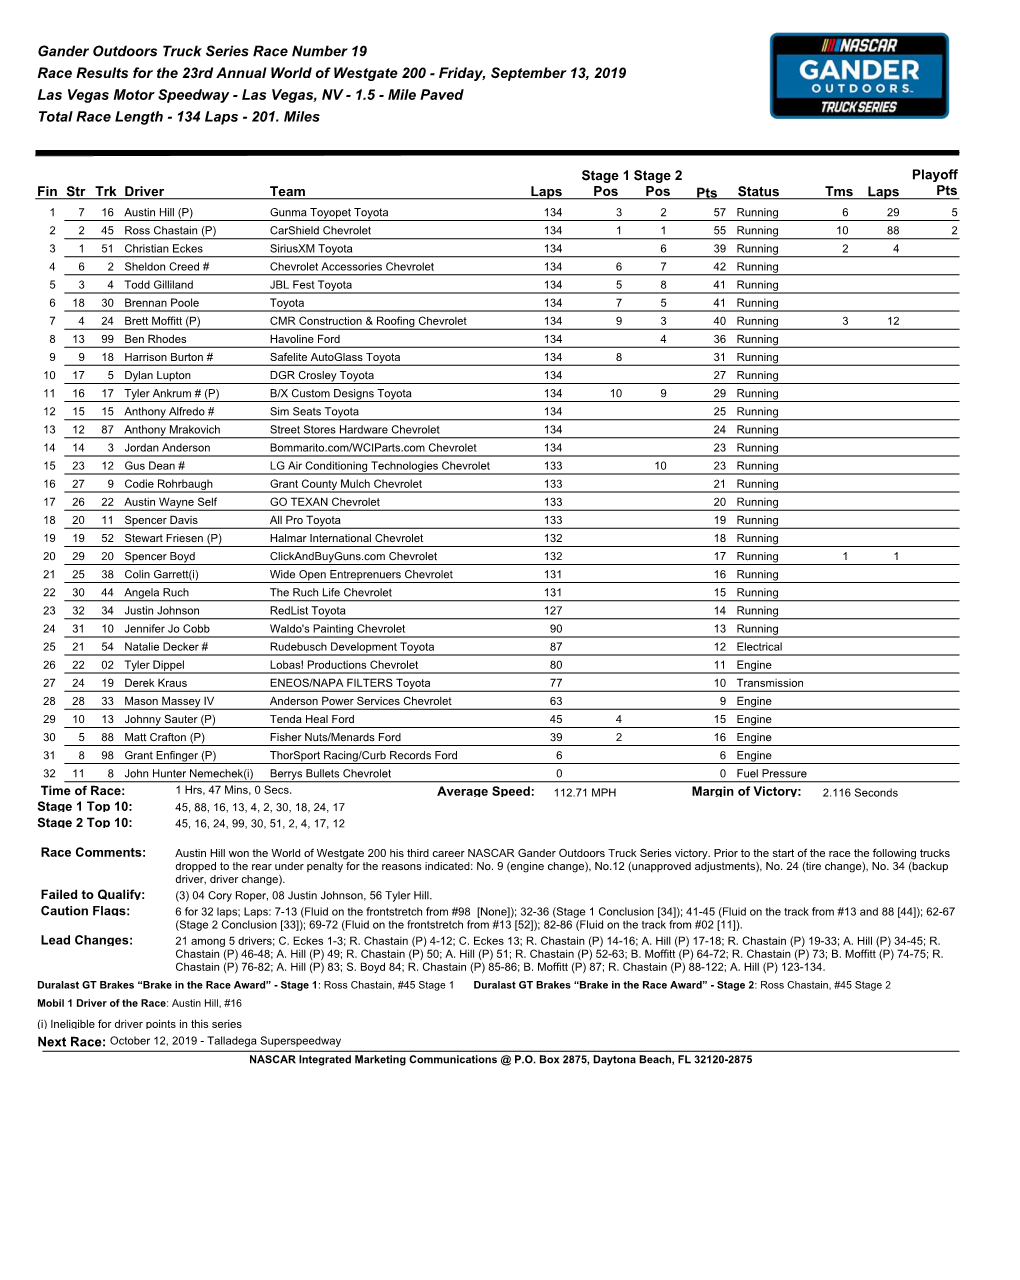 Gander Outdoors Truck Series Race Number 19 Race Results for The